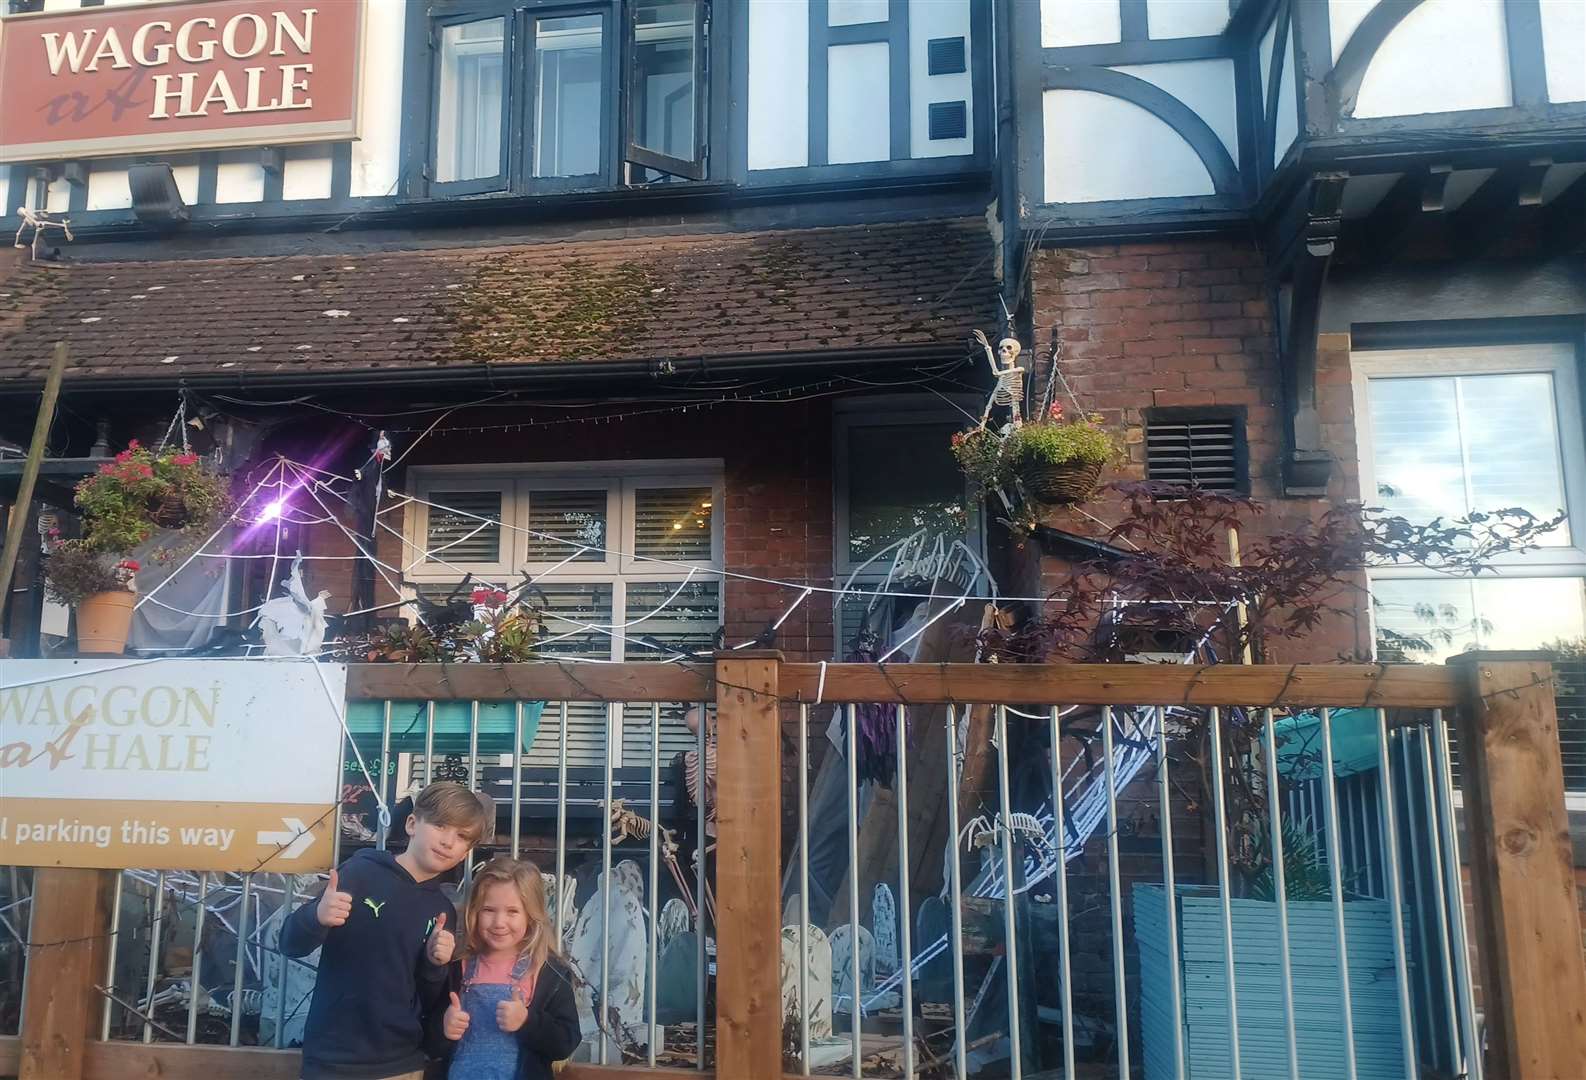 The family-friendly Waggon at Hale has been decorated for Halloween